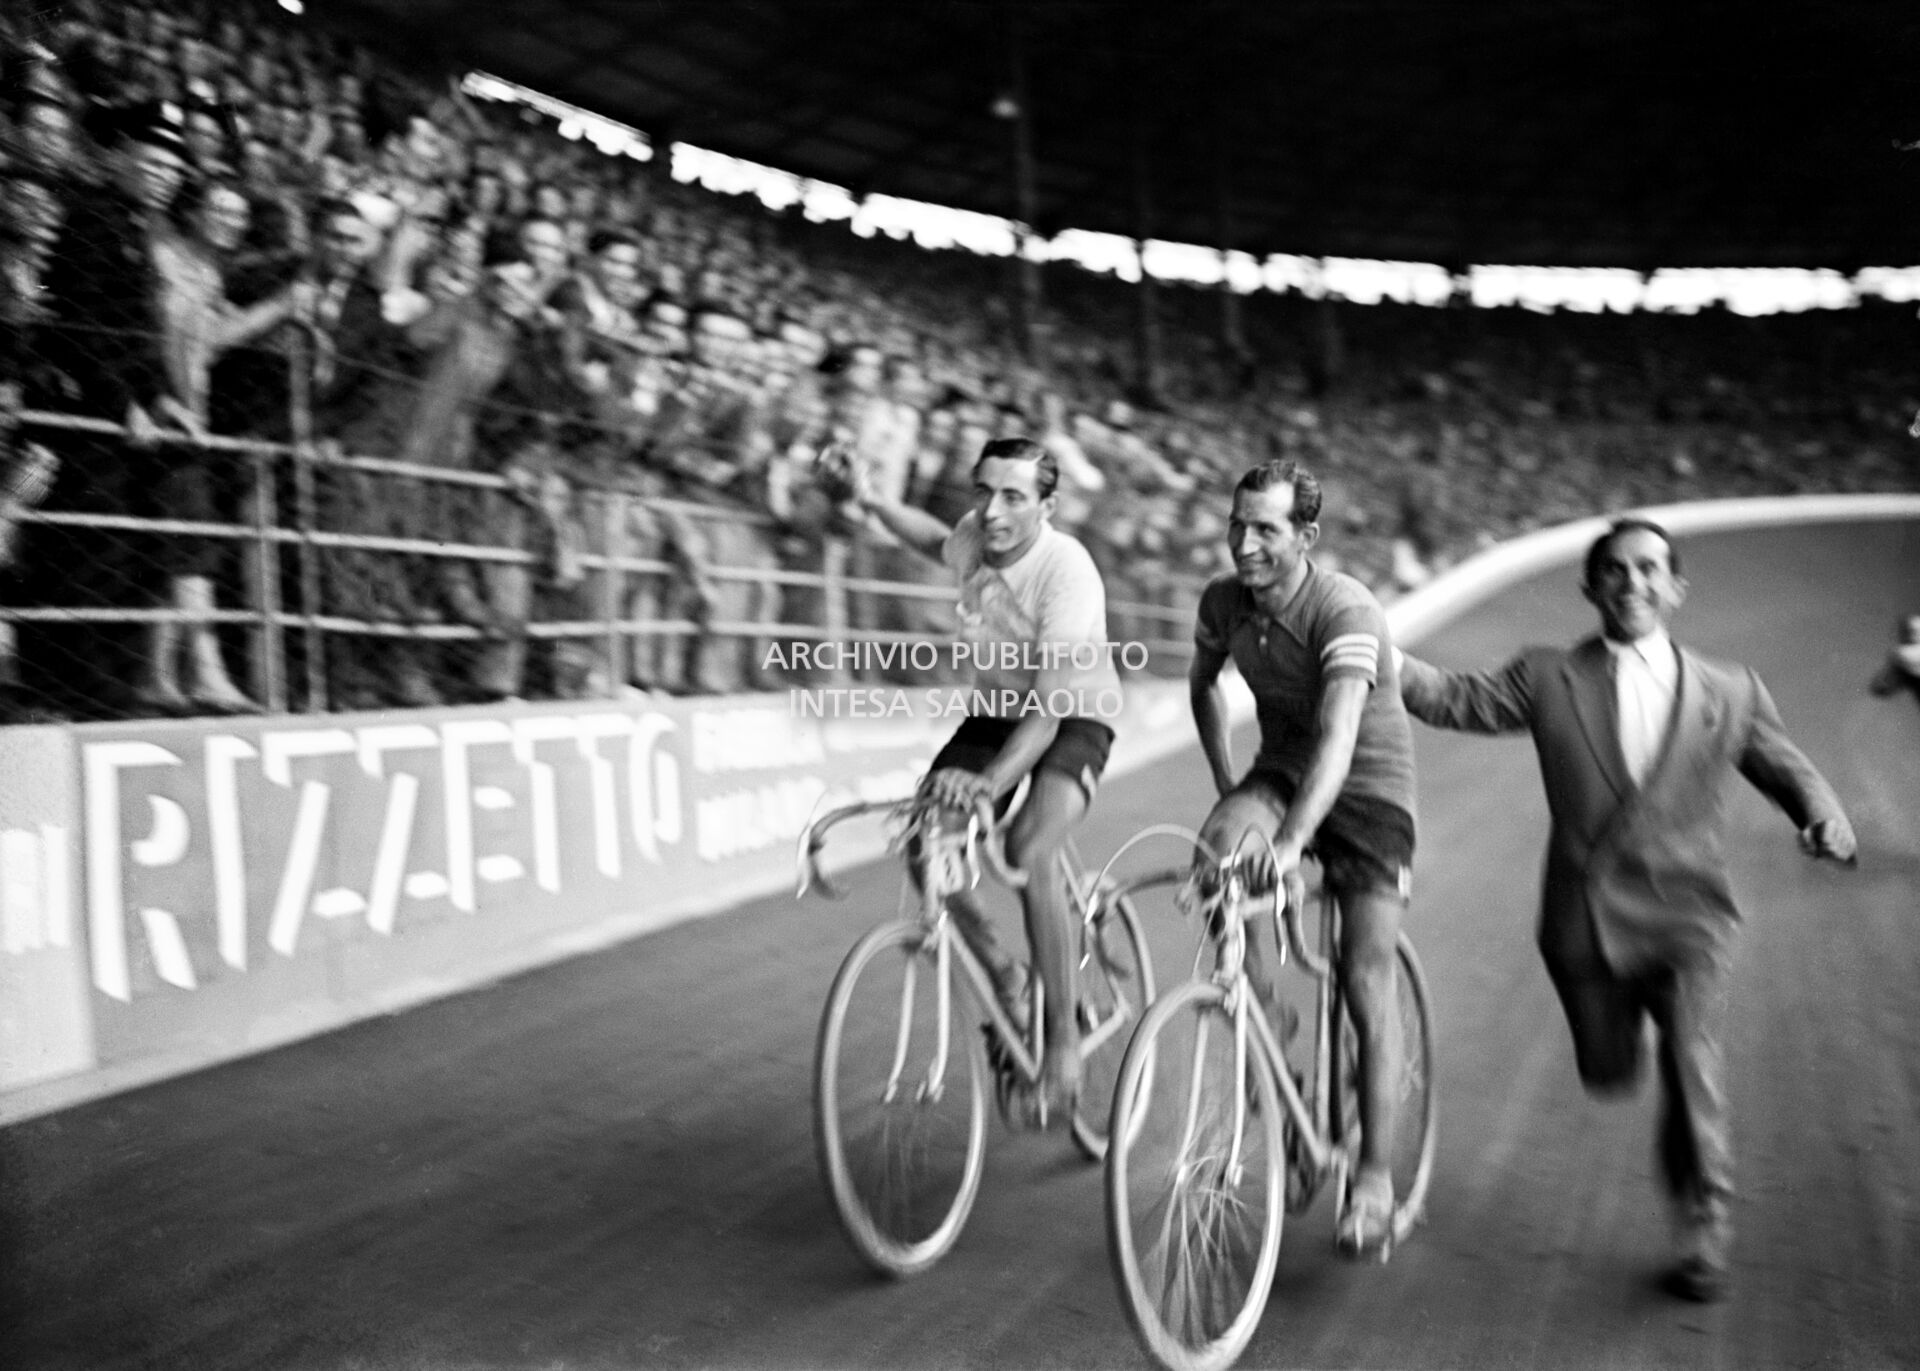 Fausto Coppi wins the 30° Giro d'Italia and completes a lap of honour with Gino Bartali at the Vigorelli velodrome of Milan